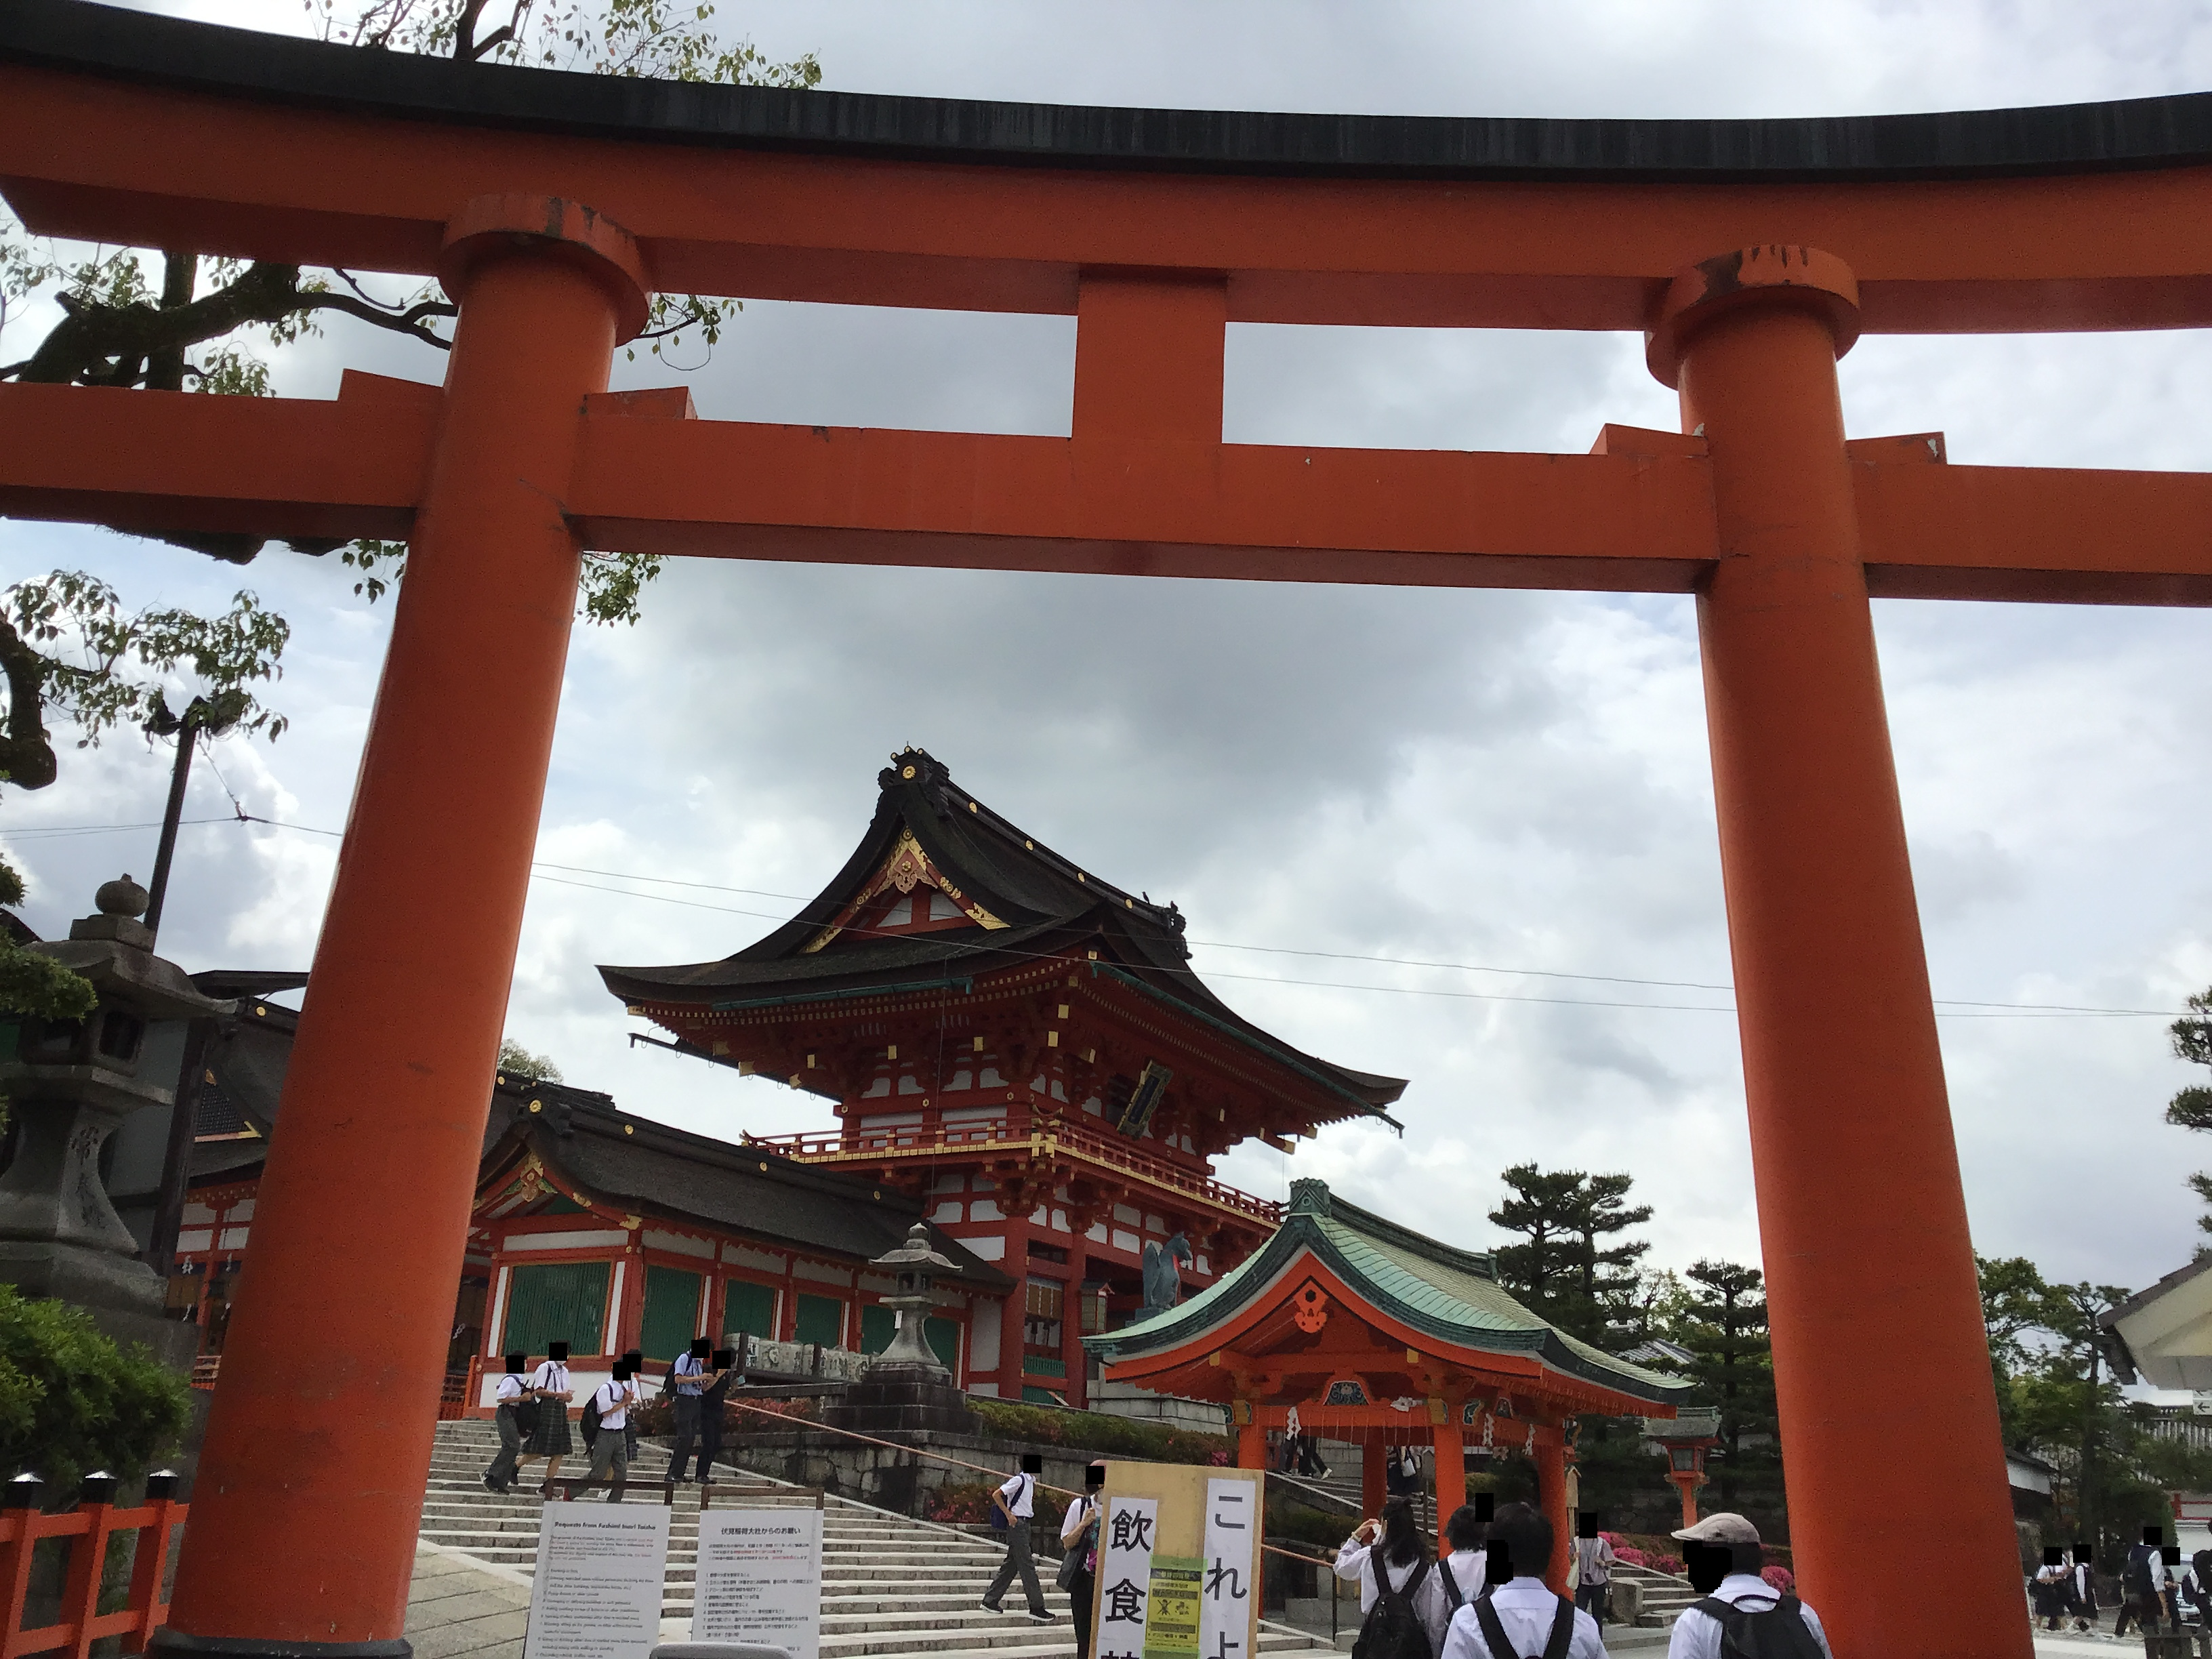 The main building of the Torii Gate Temple beyond a Torii Gate